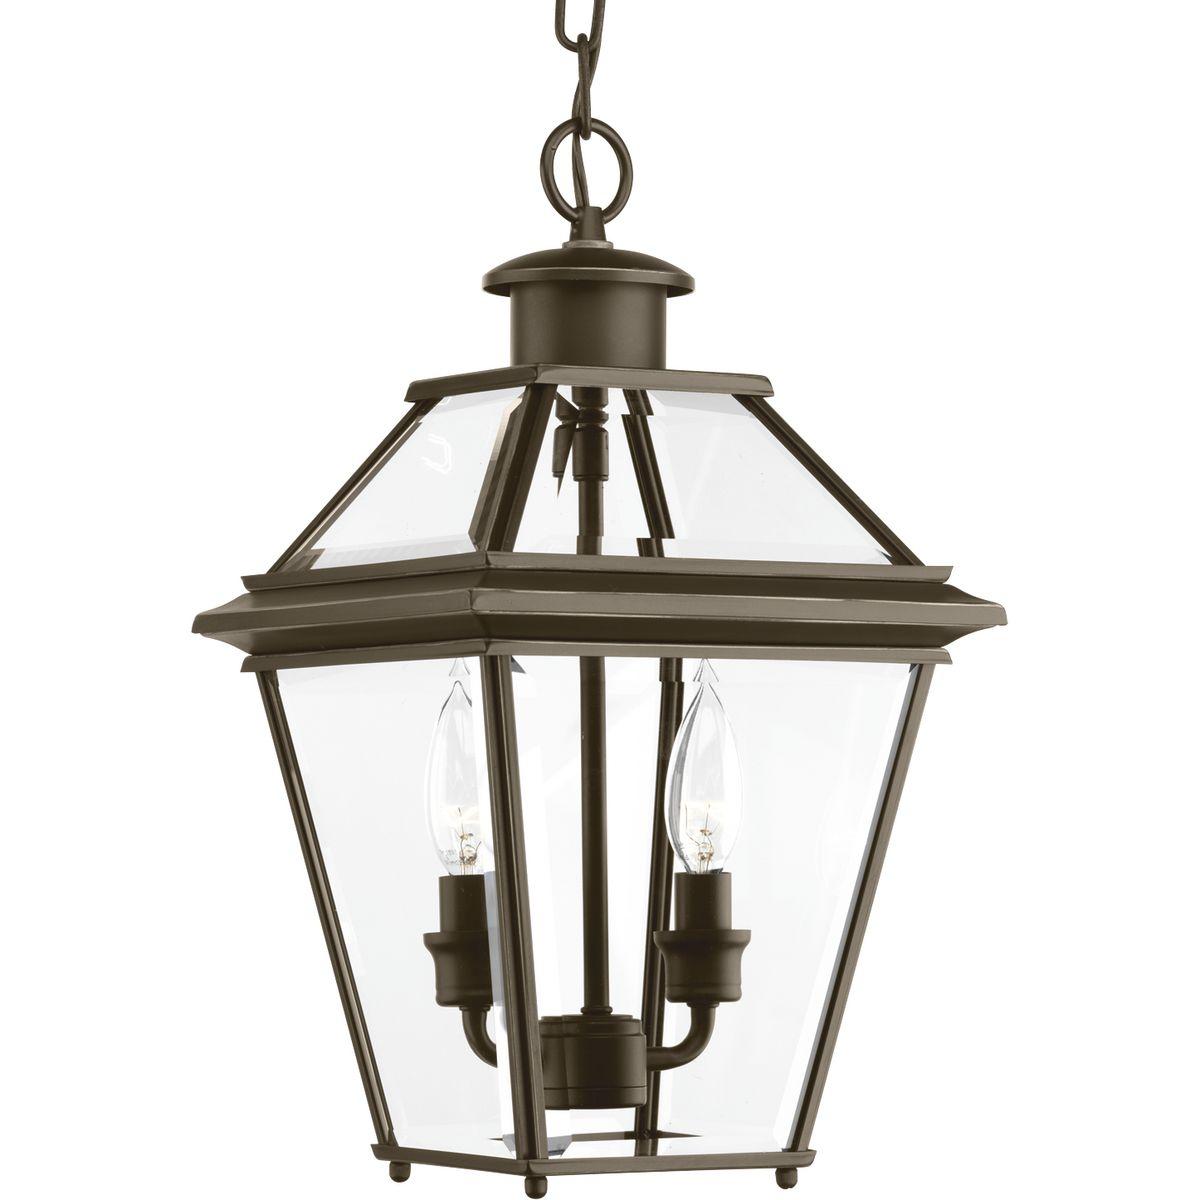 Hubbell P6537-20 The two-light hanging lantern from the Burlington outdoor collection is constructed from aluminum for durable, weather-resistant performance. An Antique Bronze finish complements the clear beveled glass. Open bottom design allows individuals to replace la